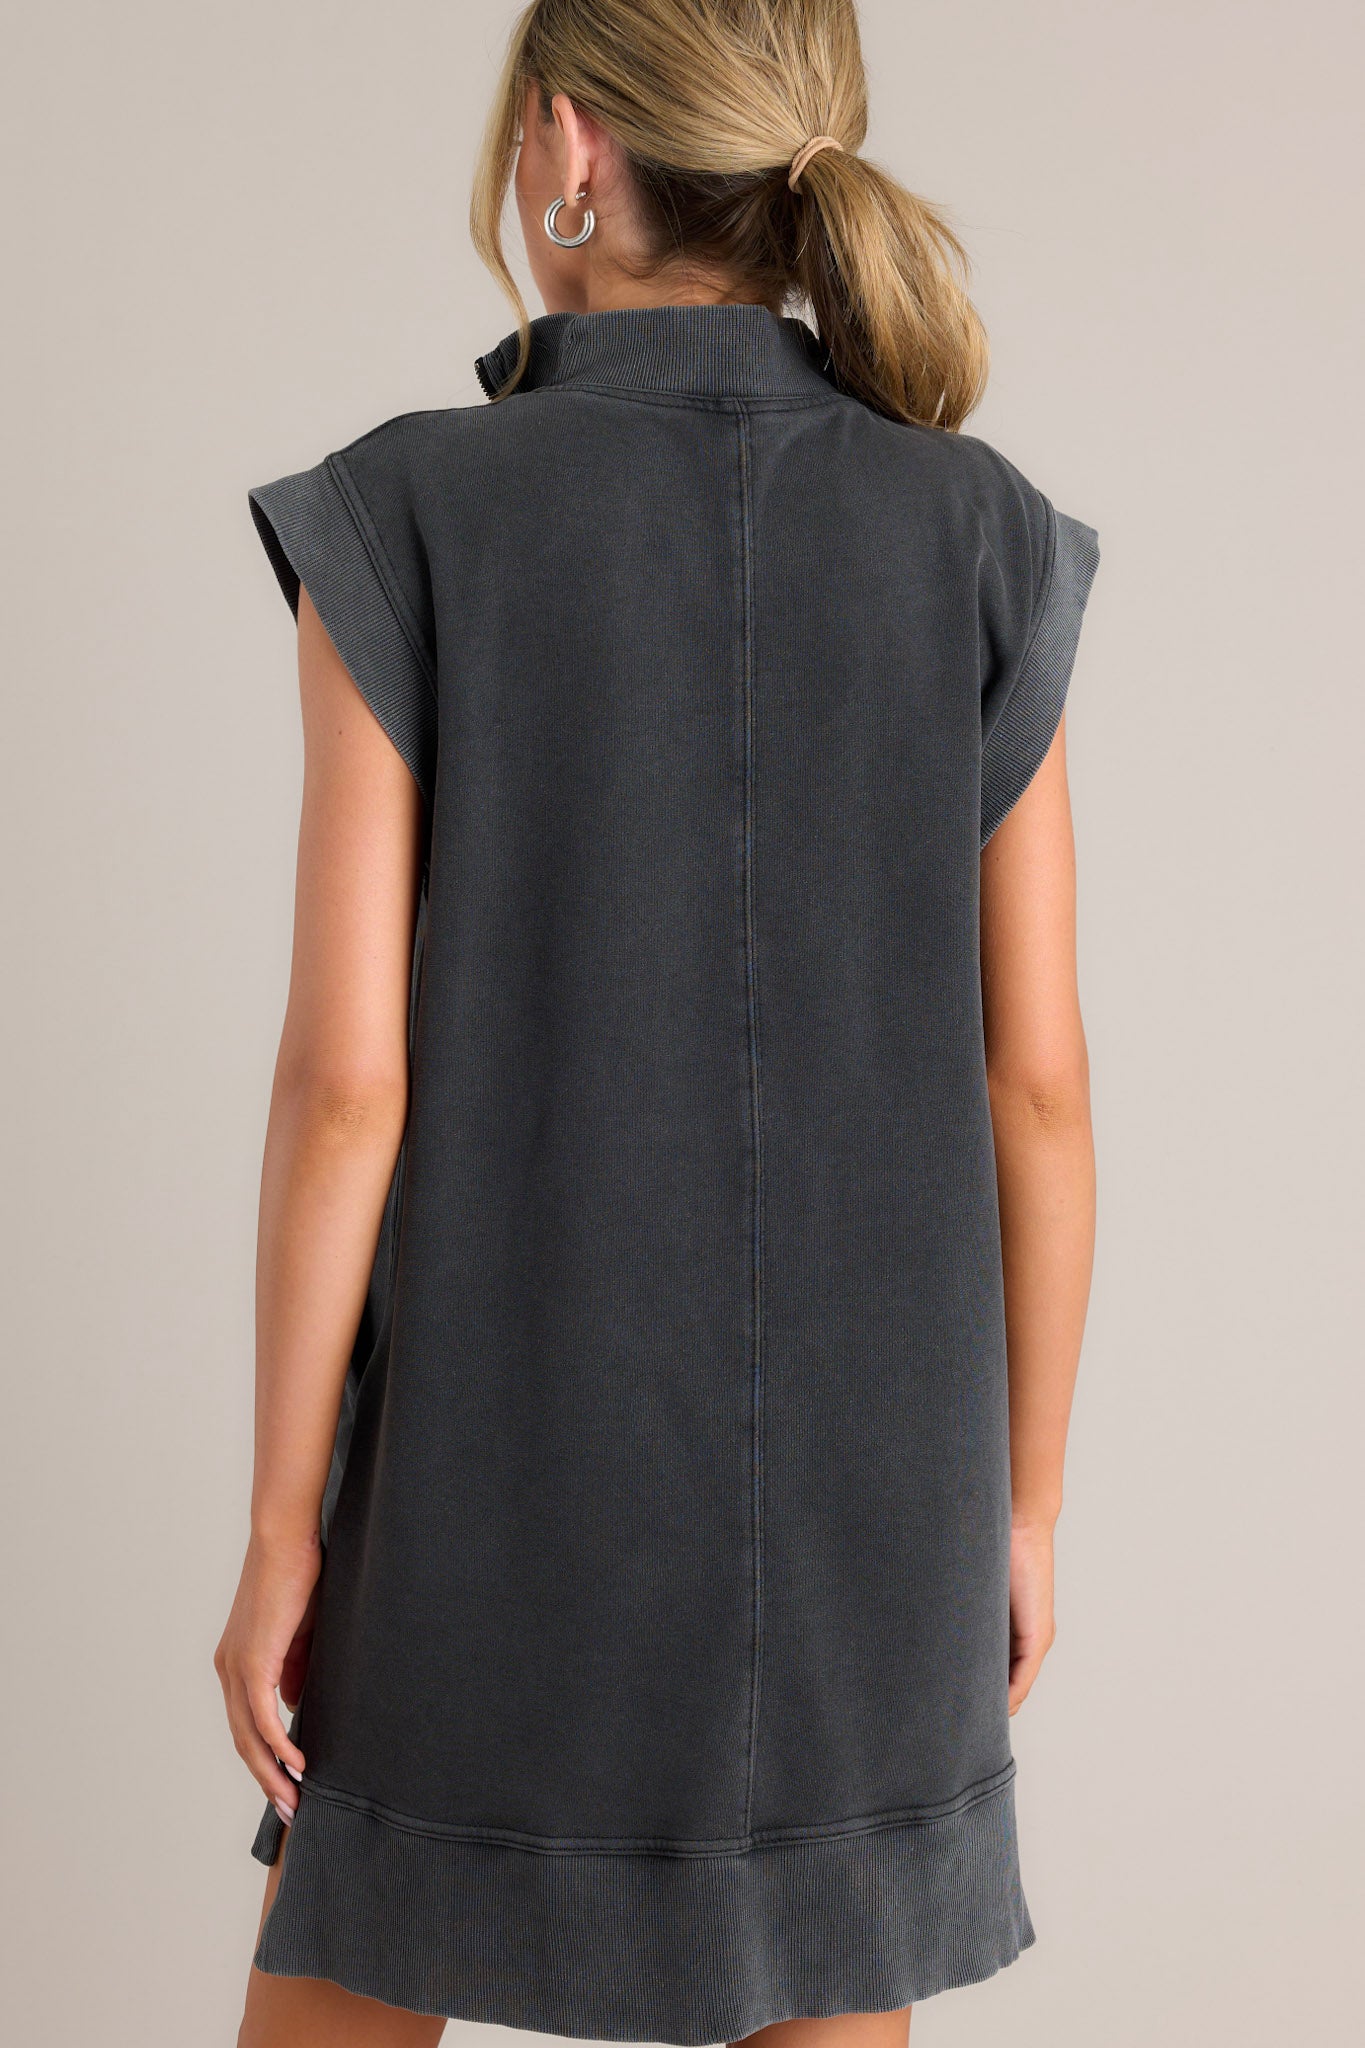 Back view of a charcoal mini dress highlighting the ribbed detailing, the cut and shape of the dress, and the wide ribbed sleeves.